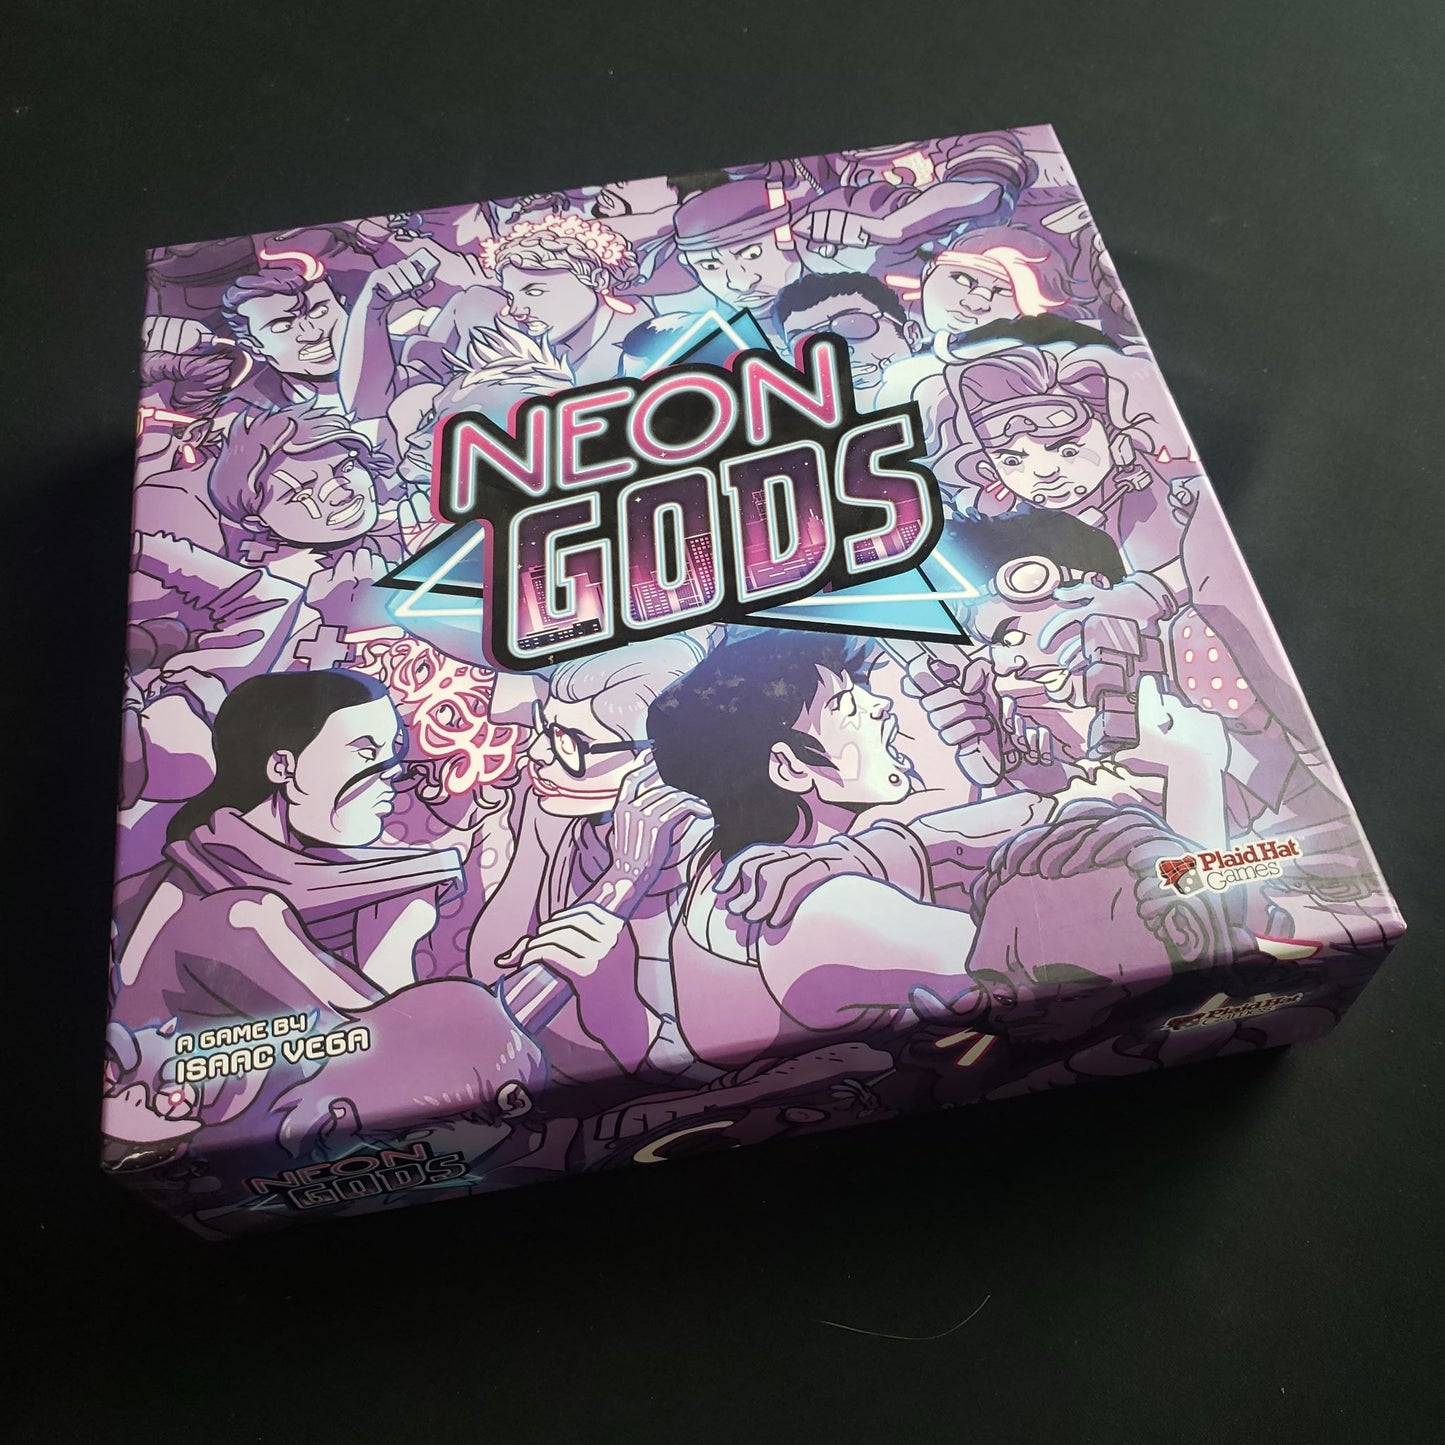 Neon Gods board game - front cover of box